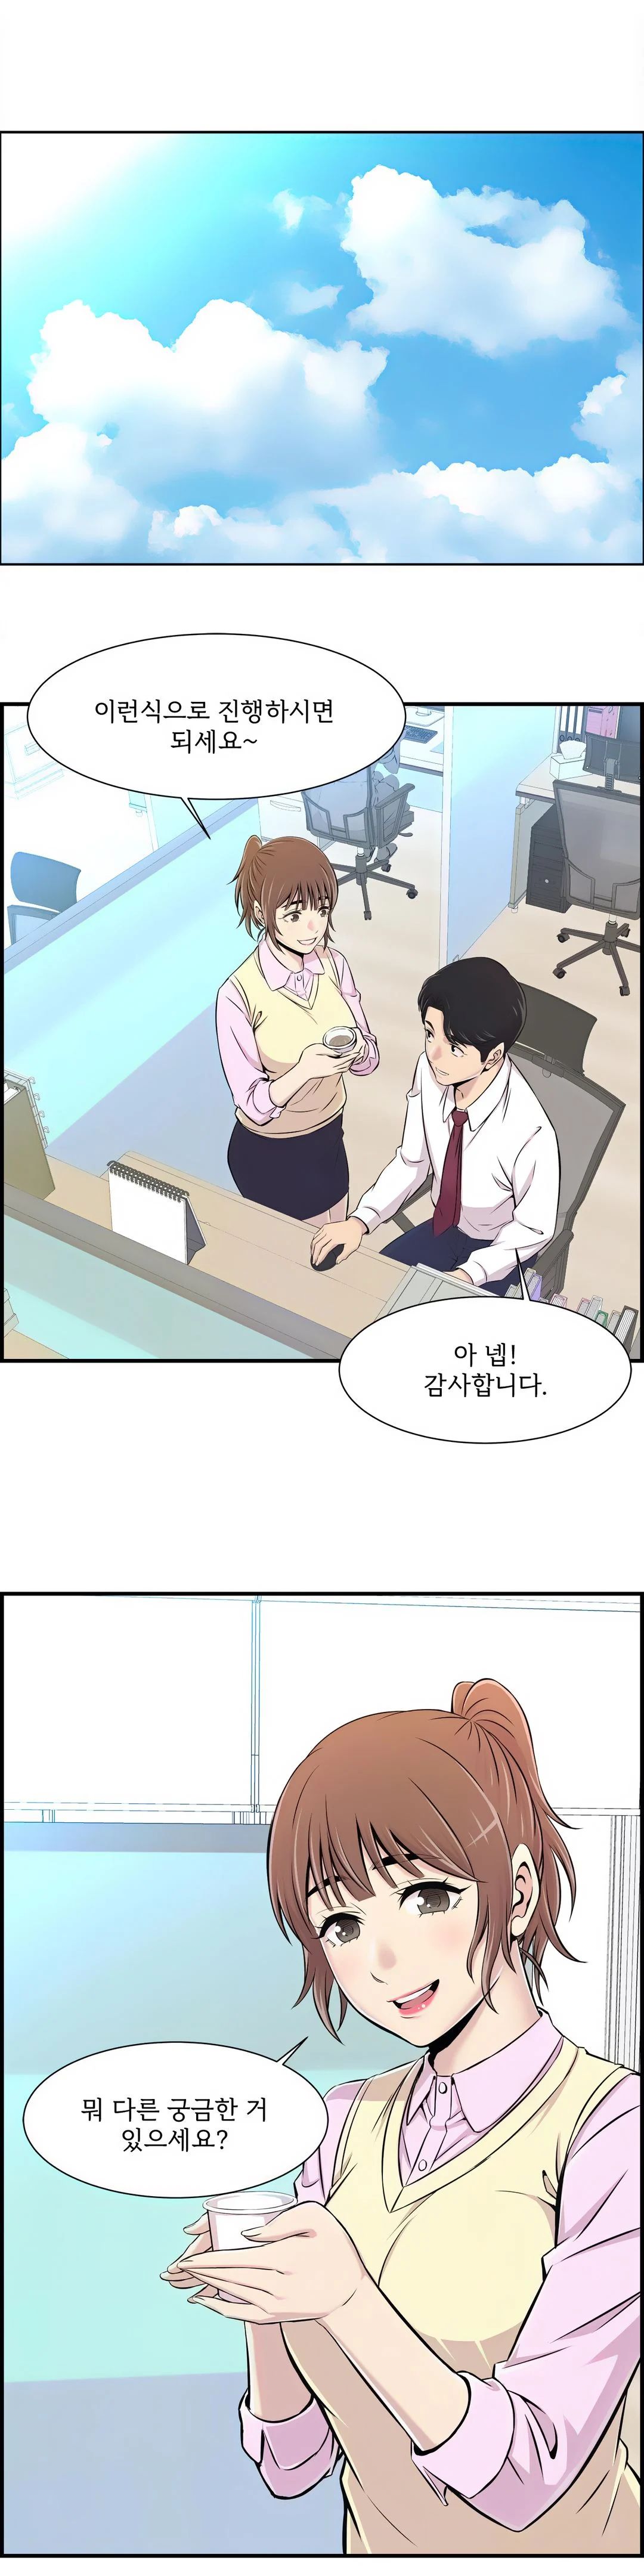 Cram School Scandal Raw - Chapter 1 Page 22